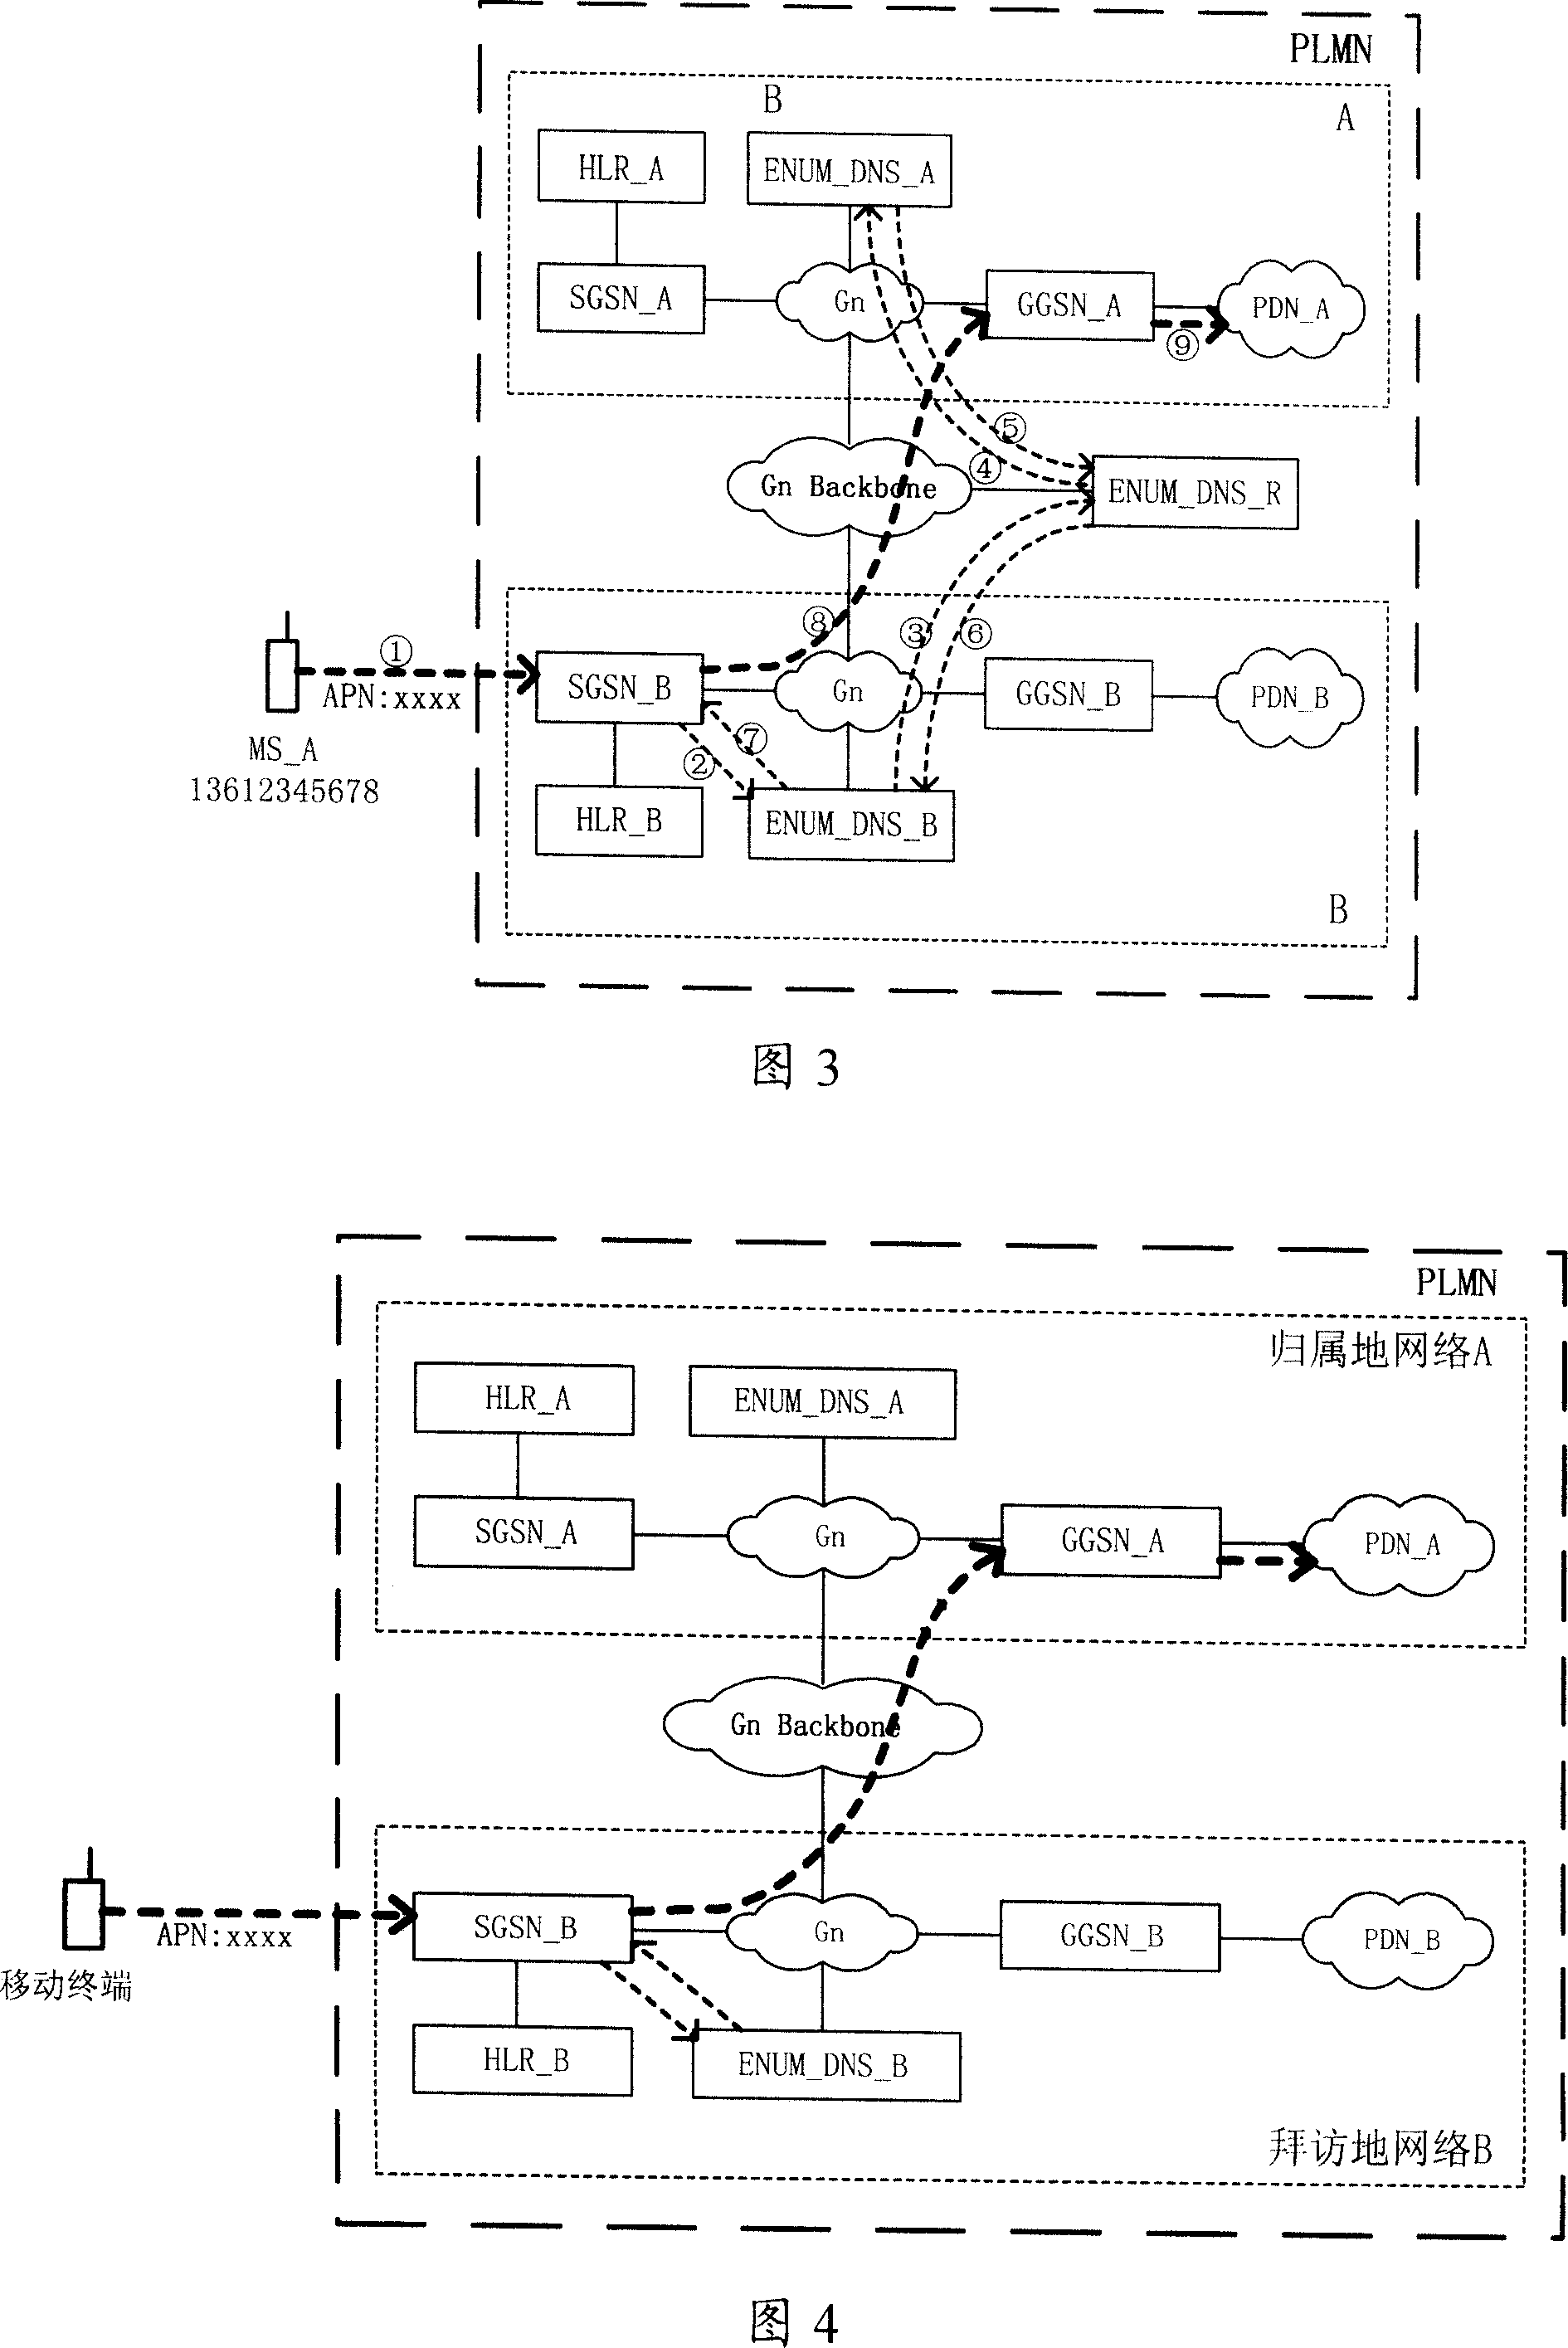 The method and system for access to the home packet data network